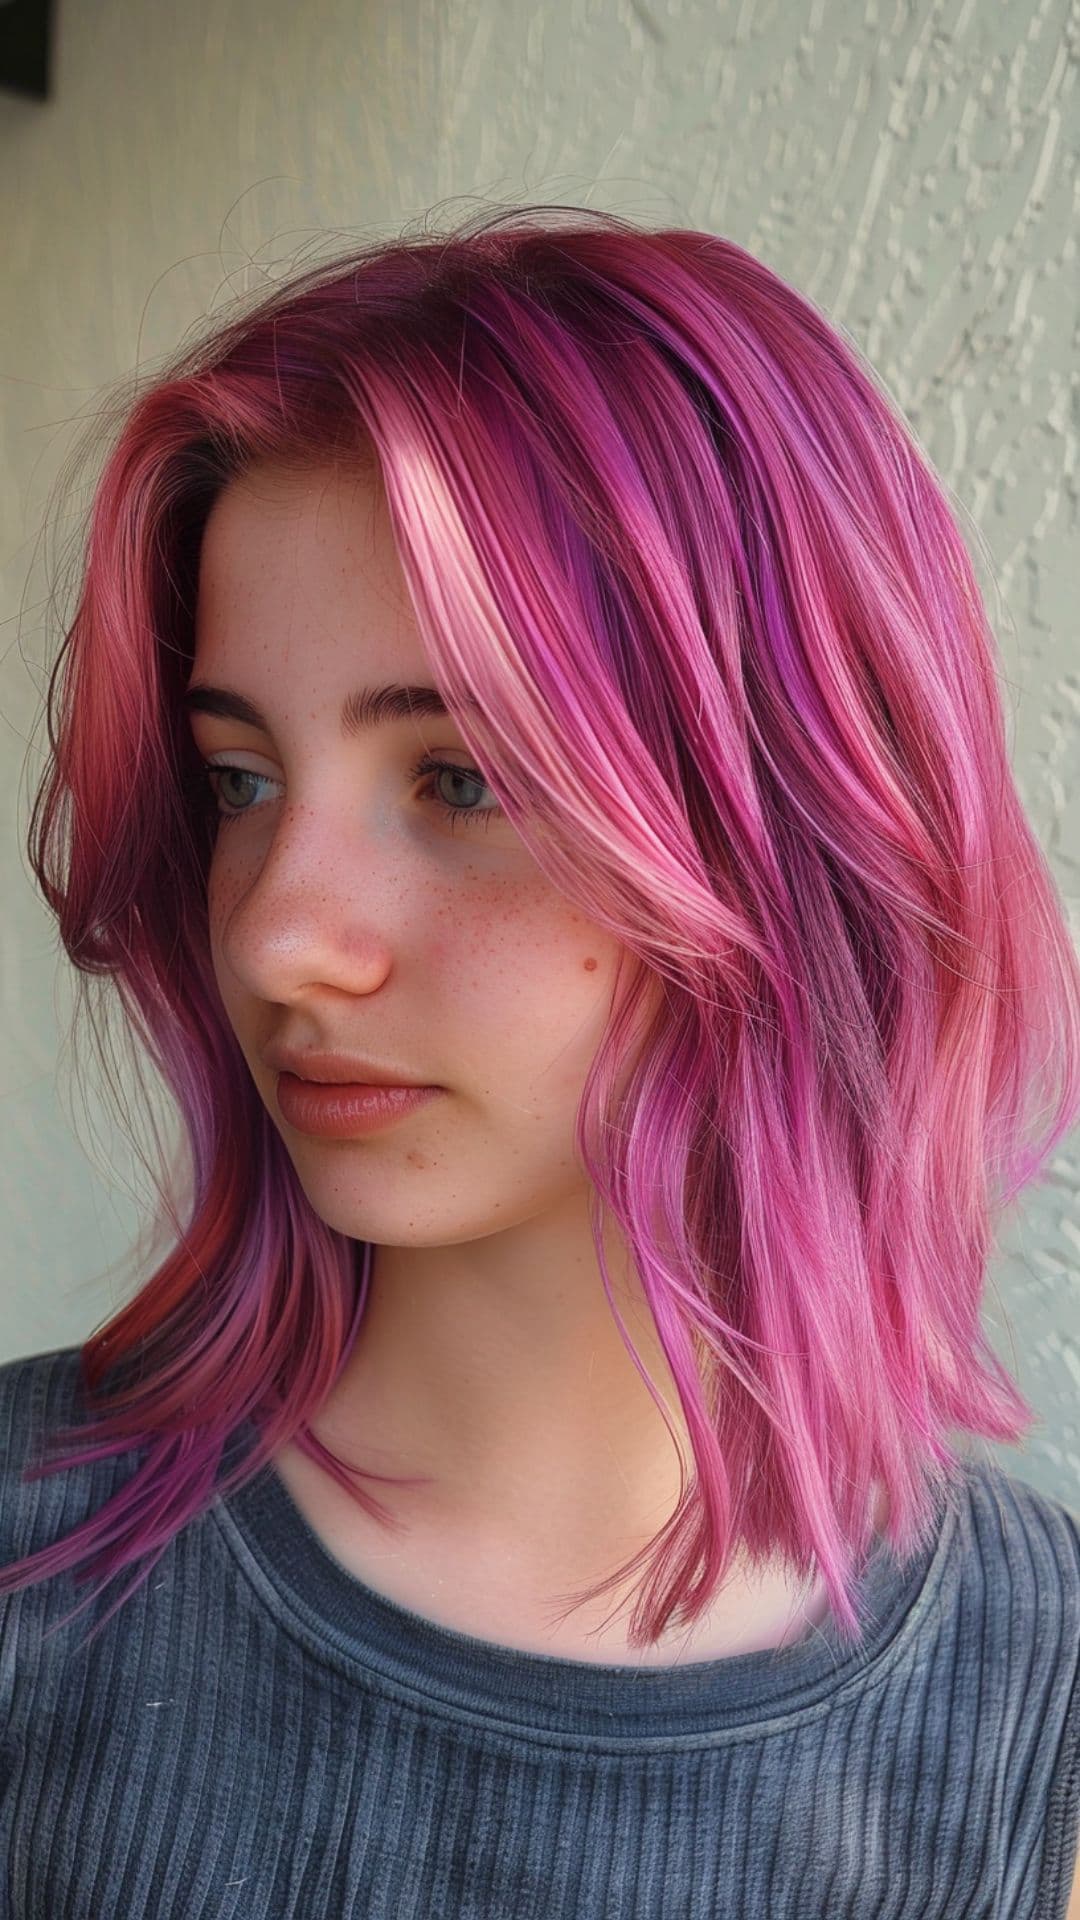 A woman modelling a pink and mauve hair.